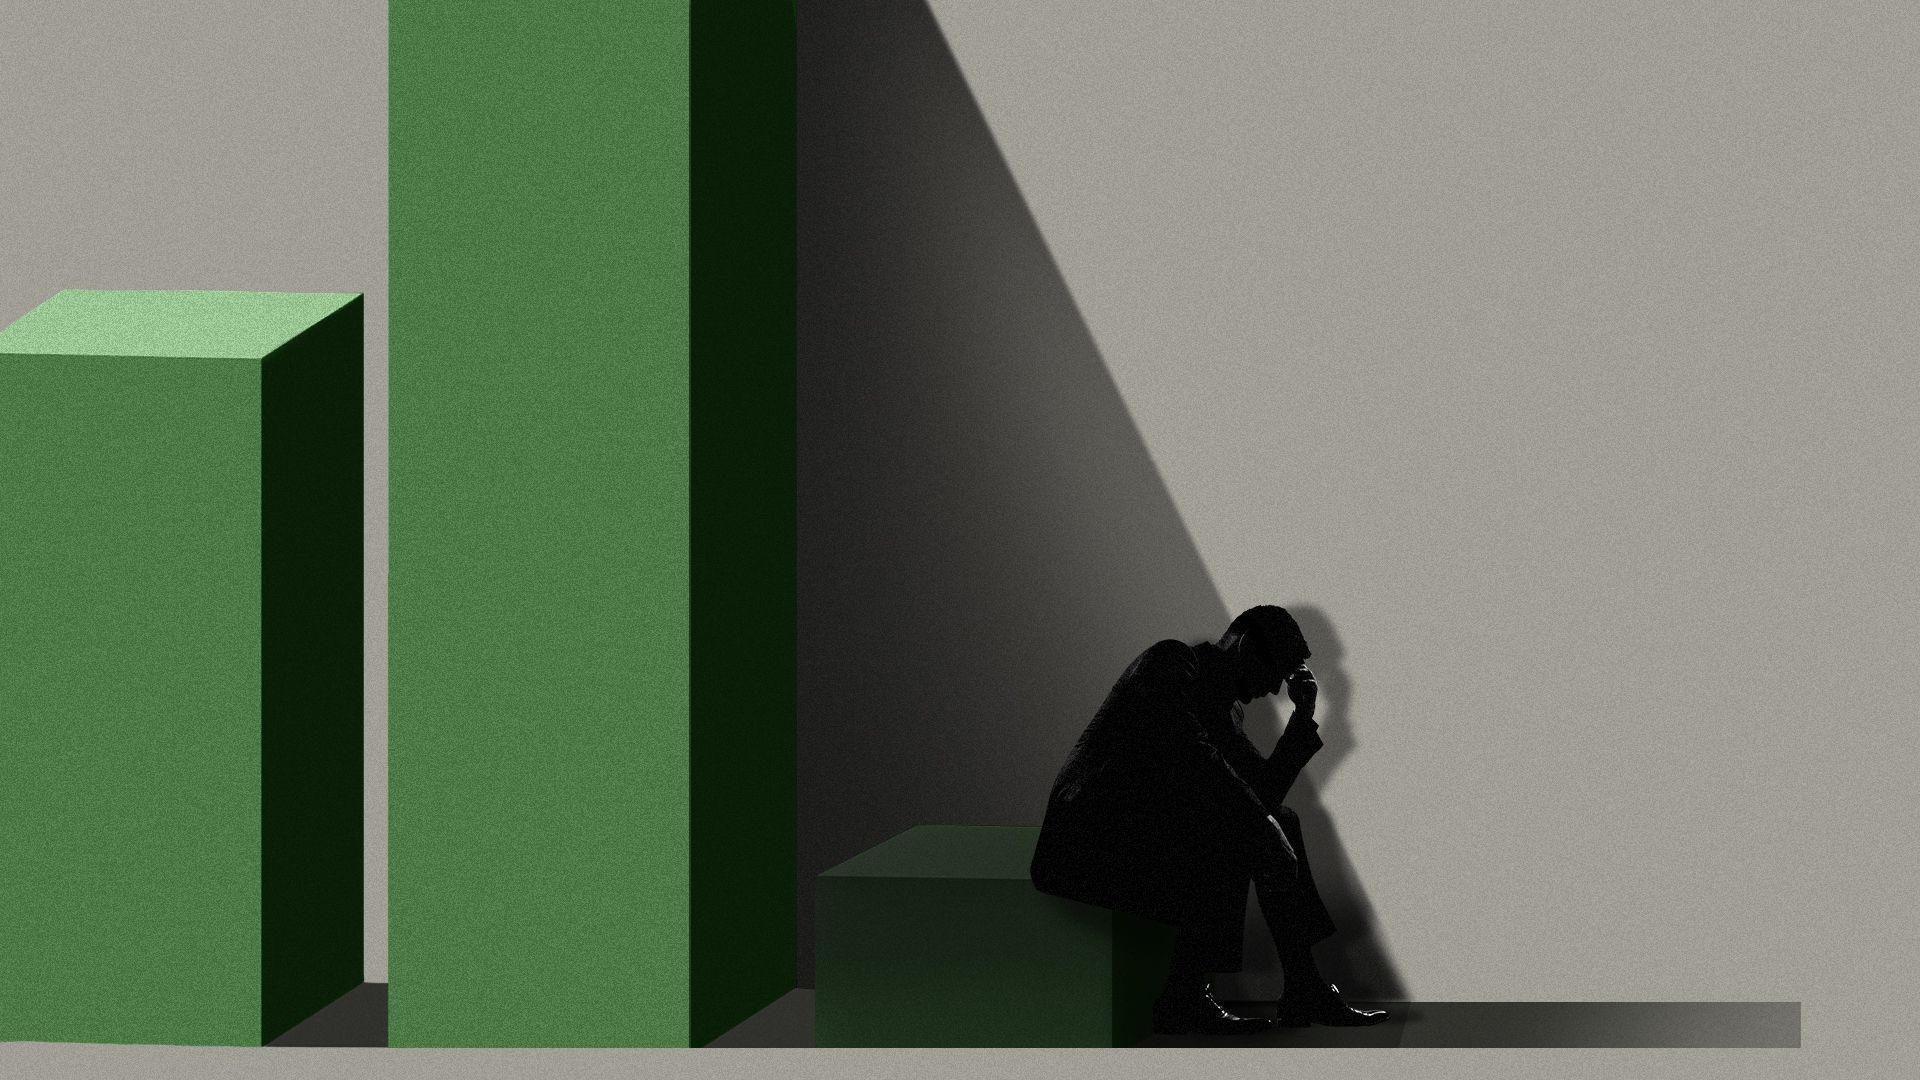 Illustration of an anxious man sitting in the shadows of a bar chart.